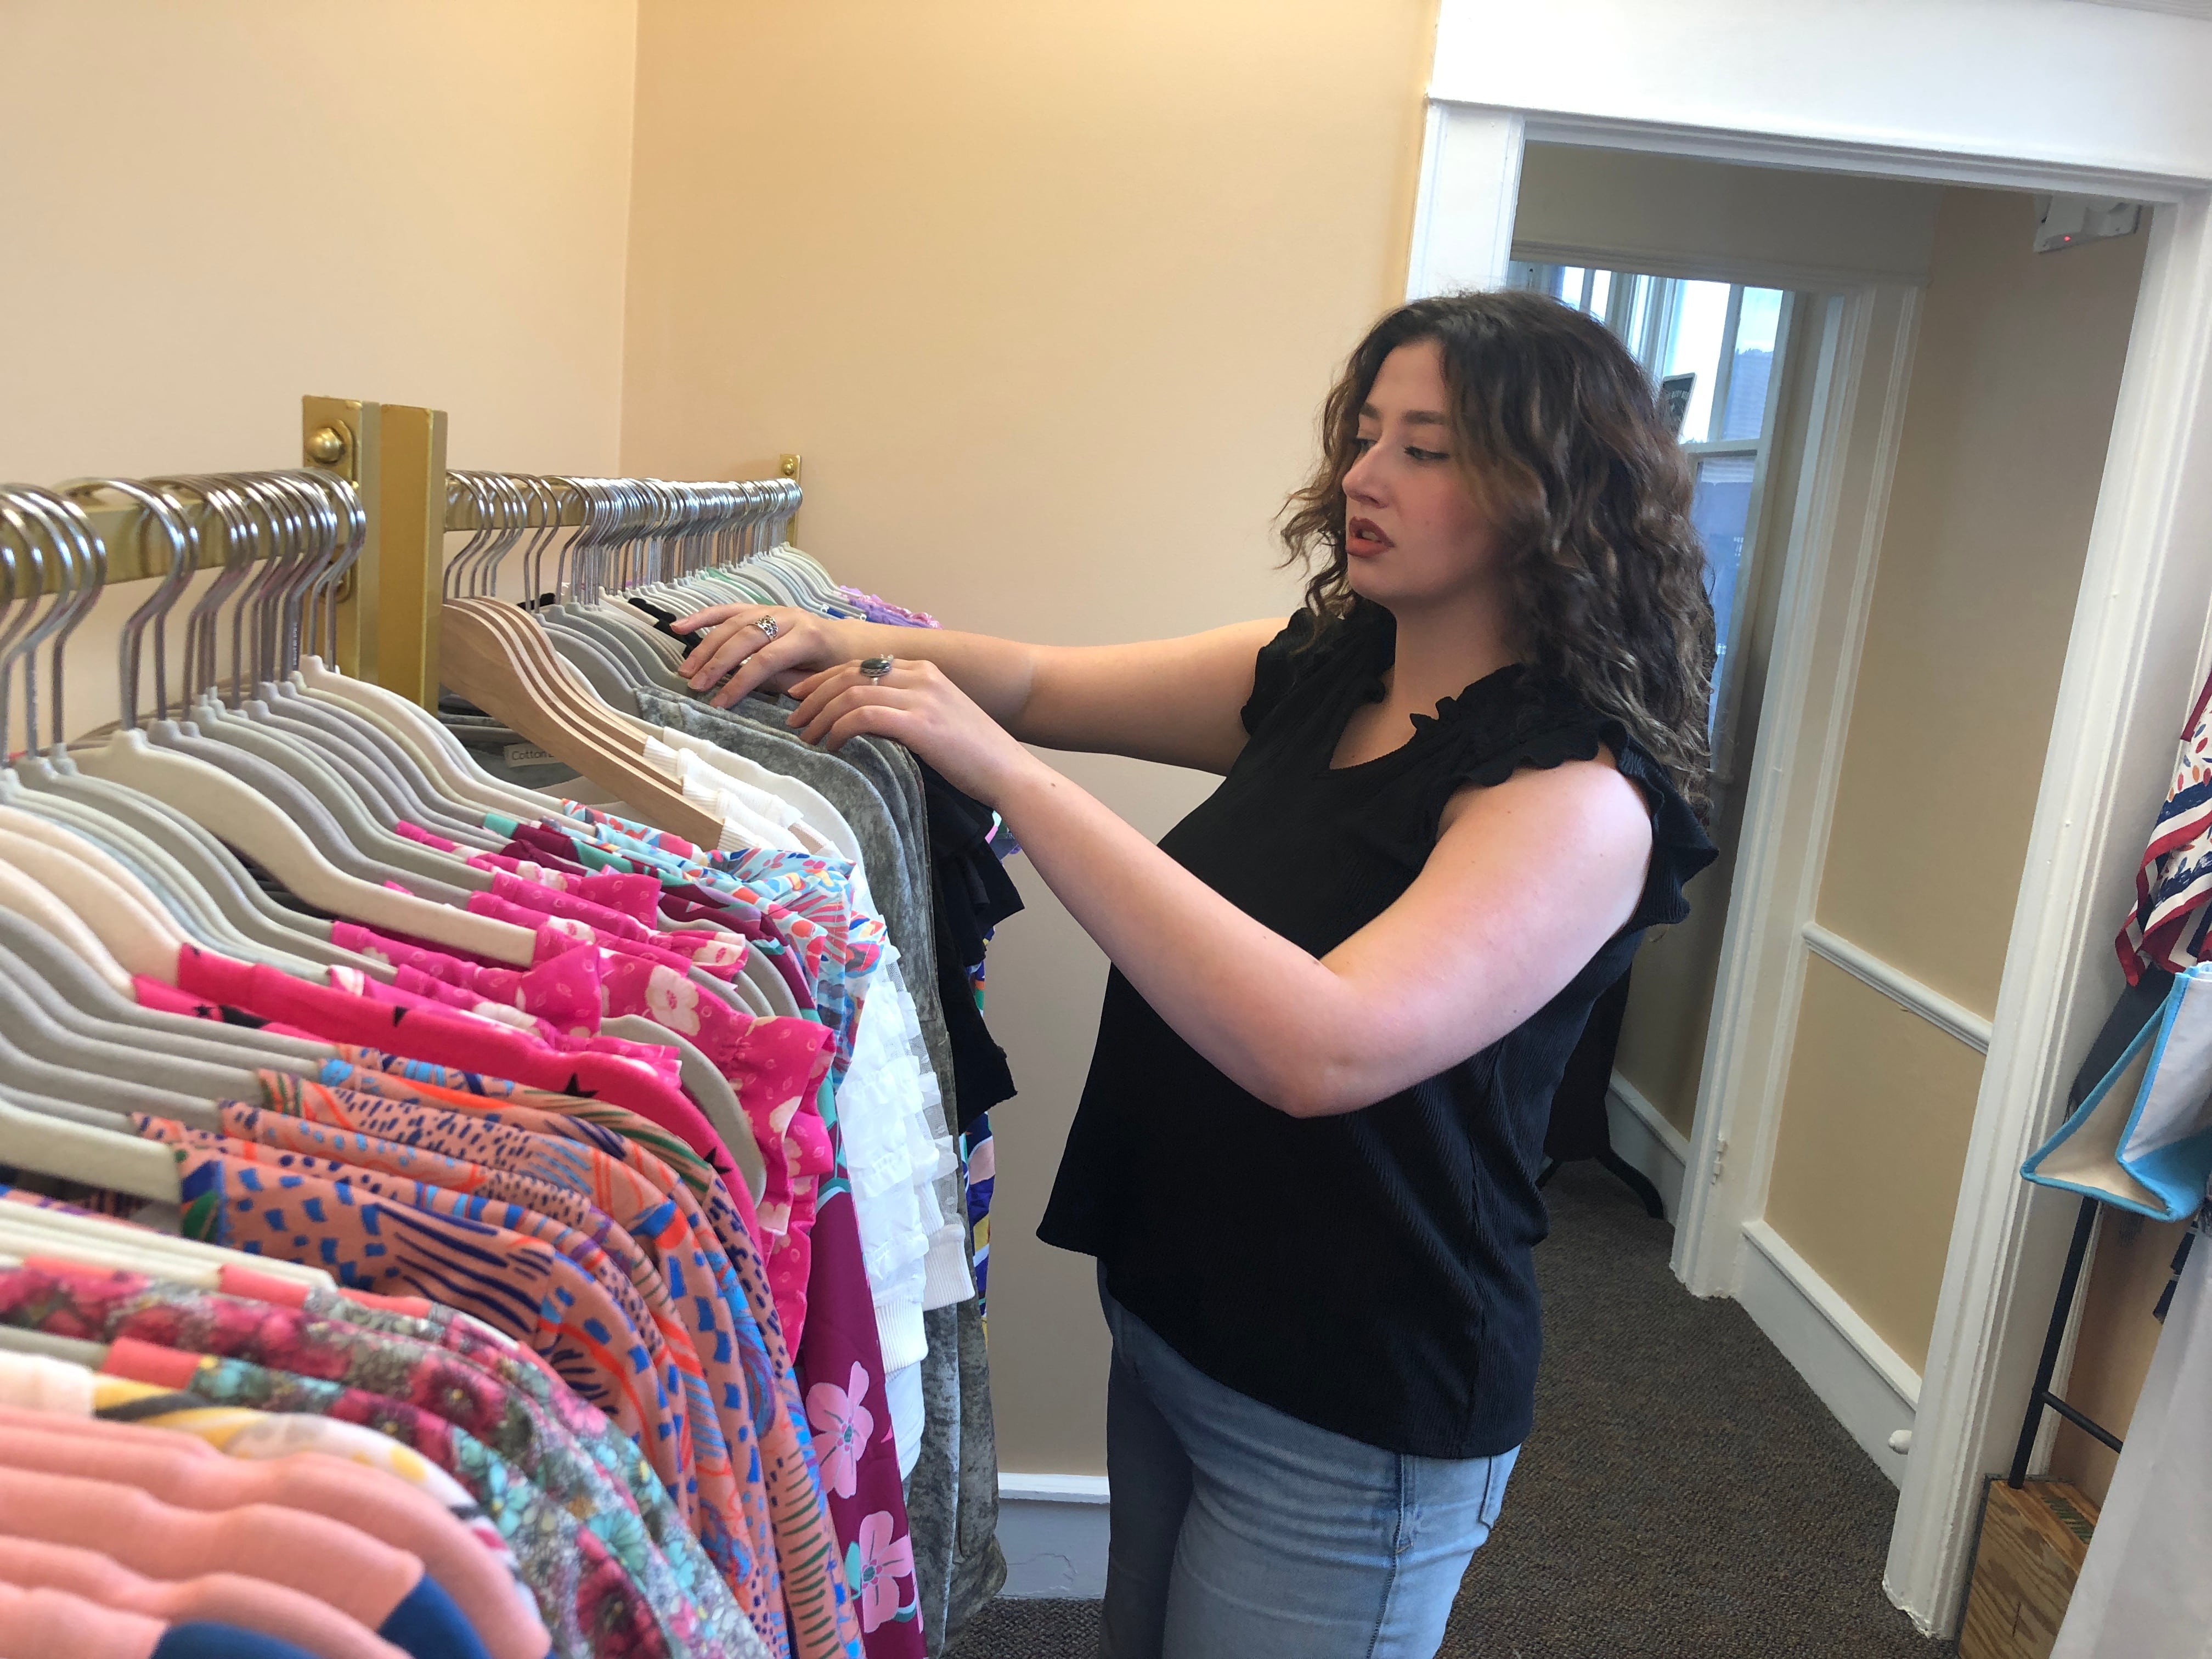 New McHenry boutique owner has long family history in retail – but her day job is school principal